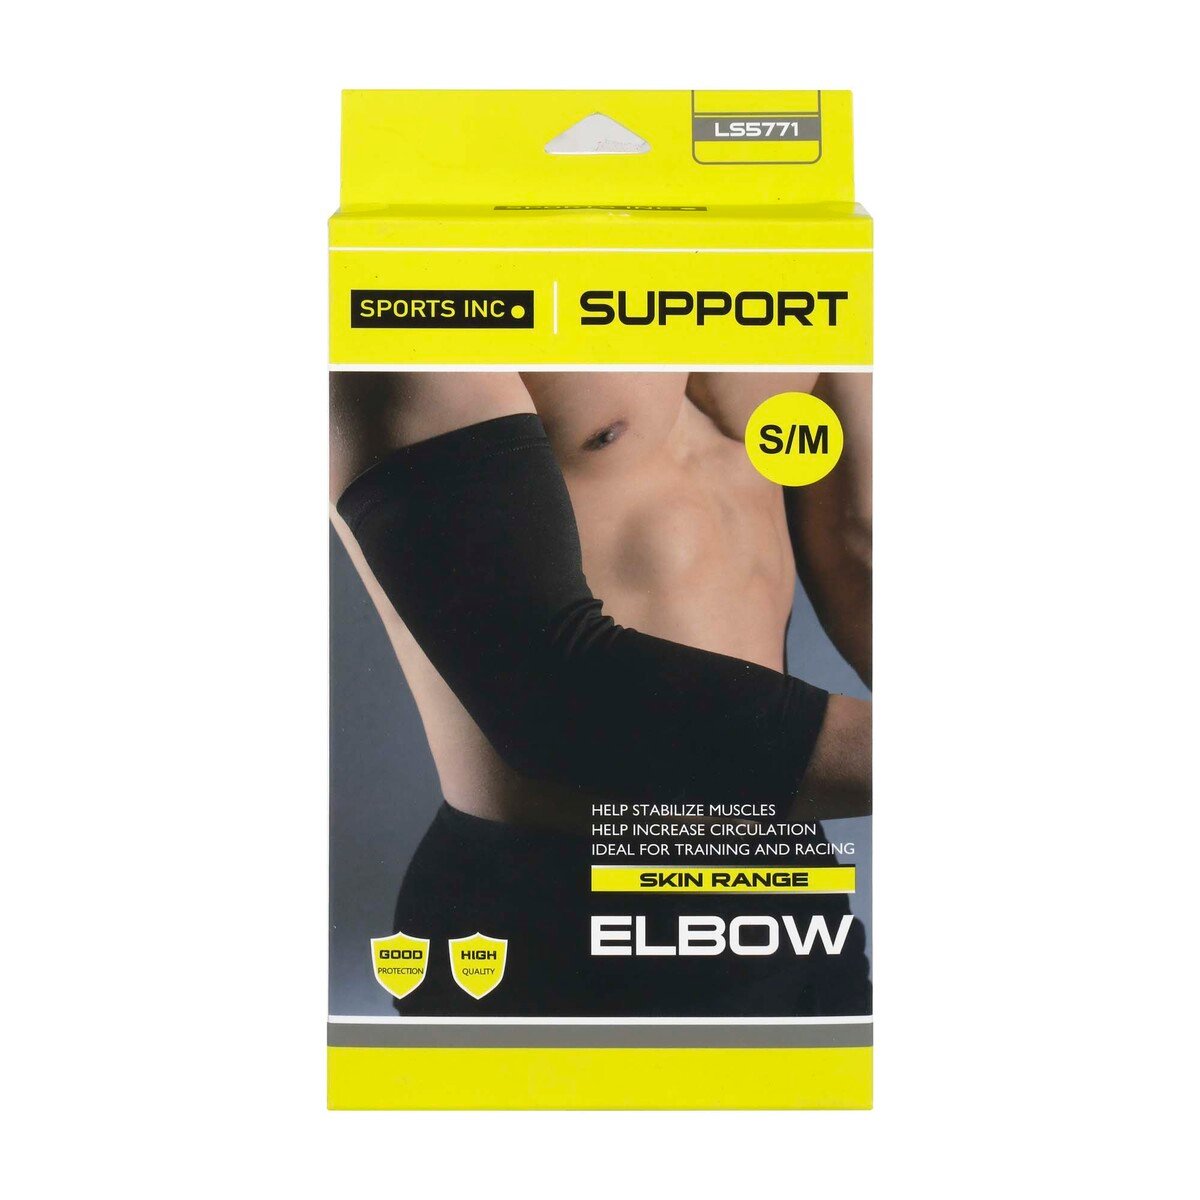 Sports Inc Elbow Support, LS5771, Small